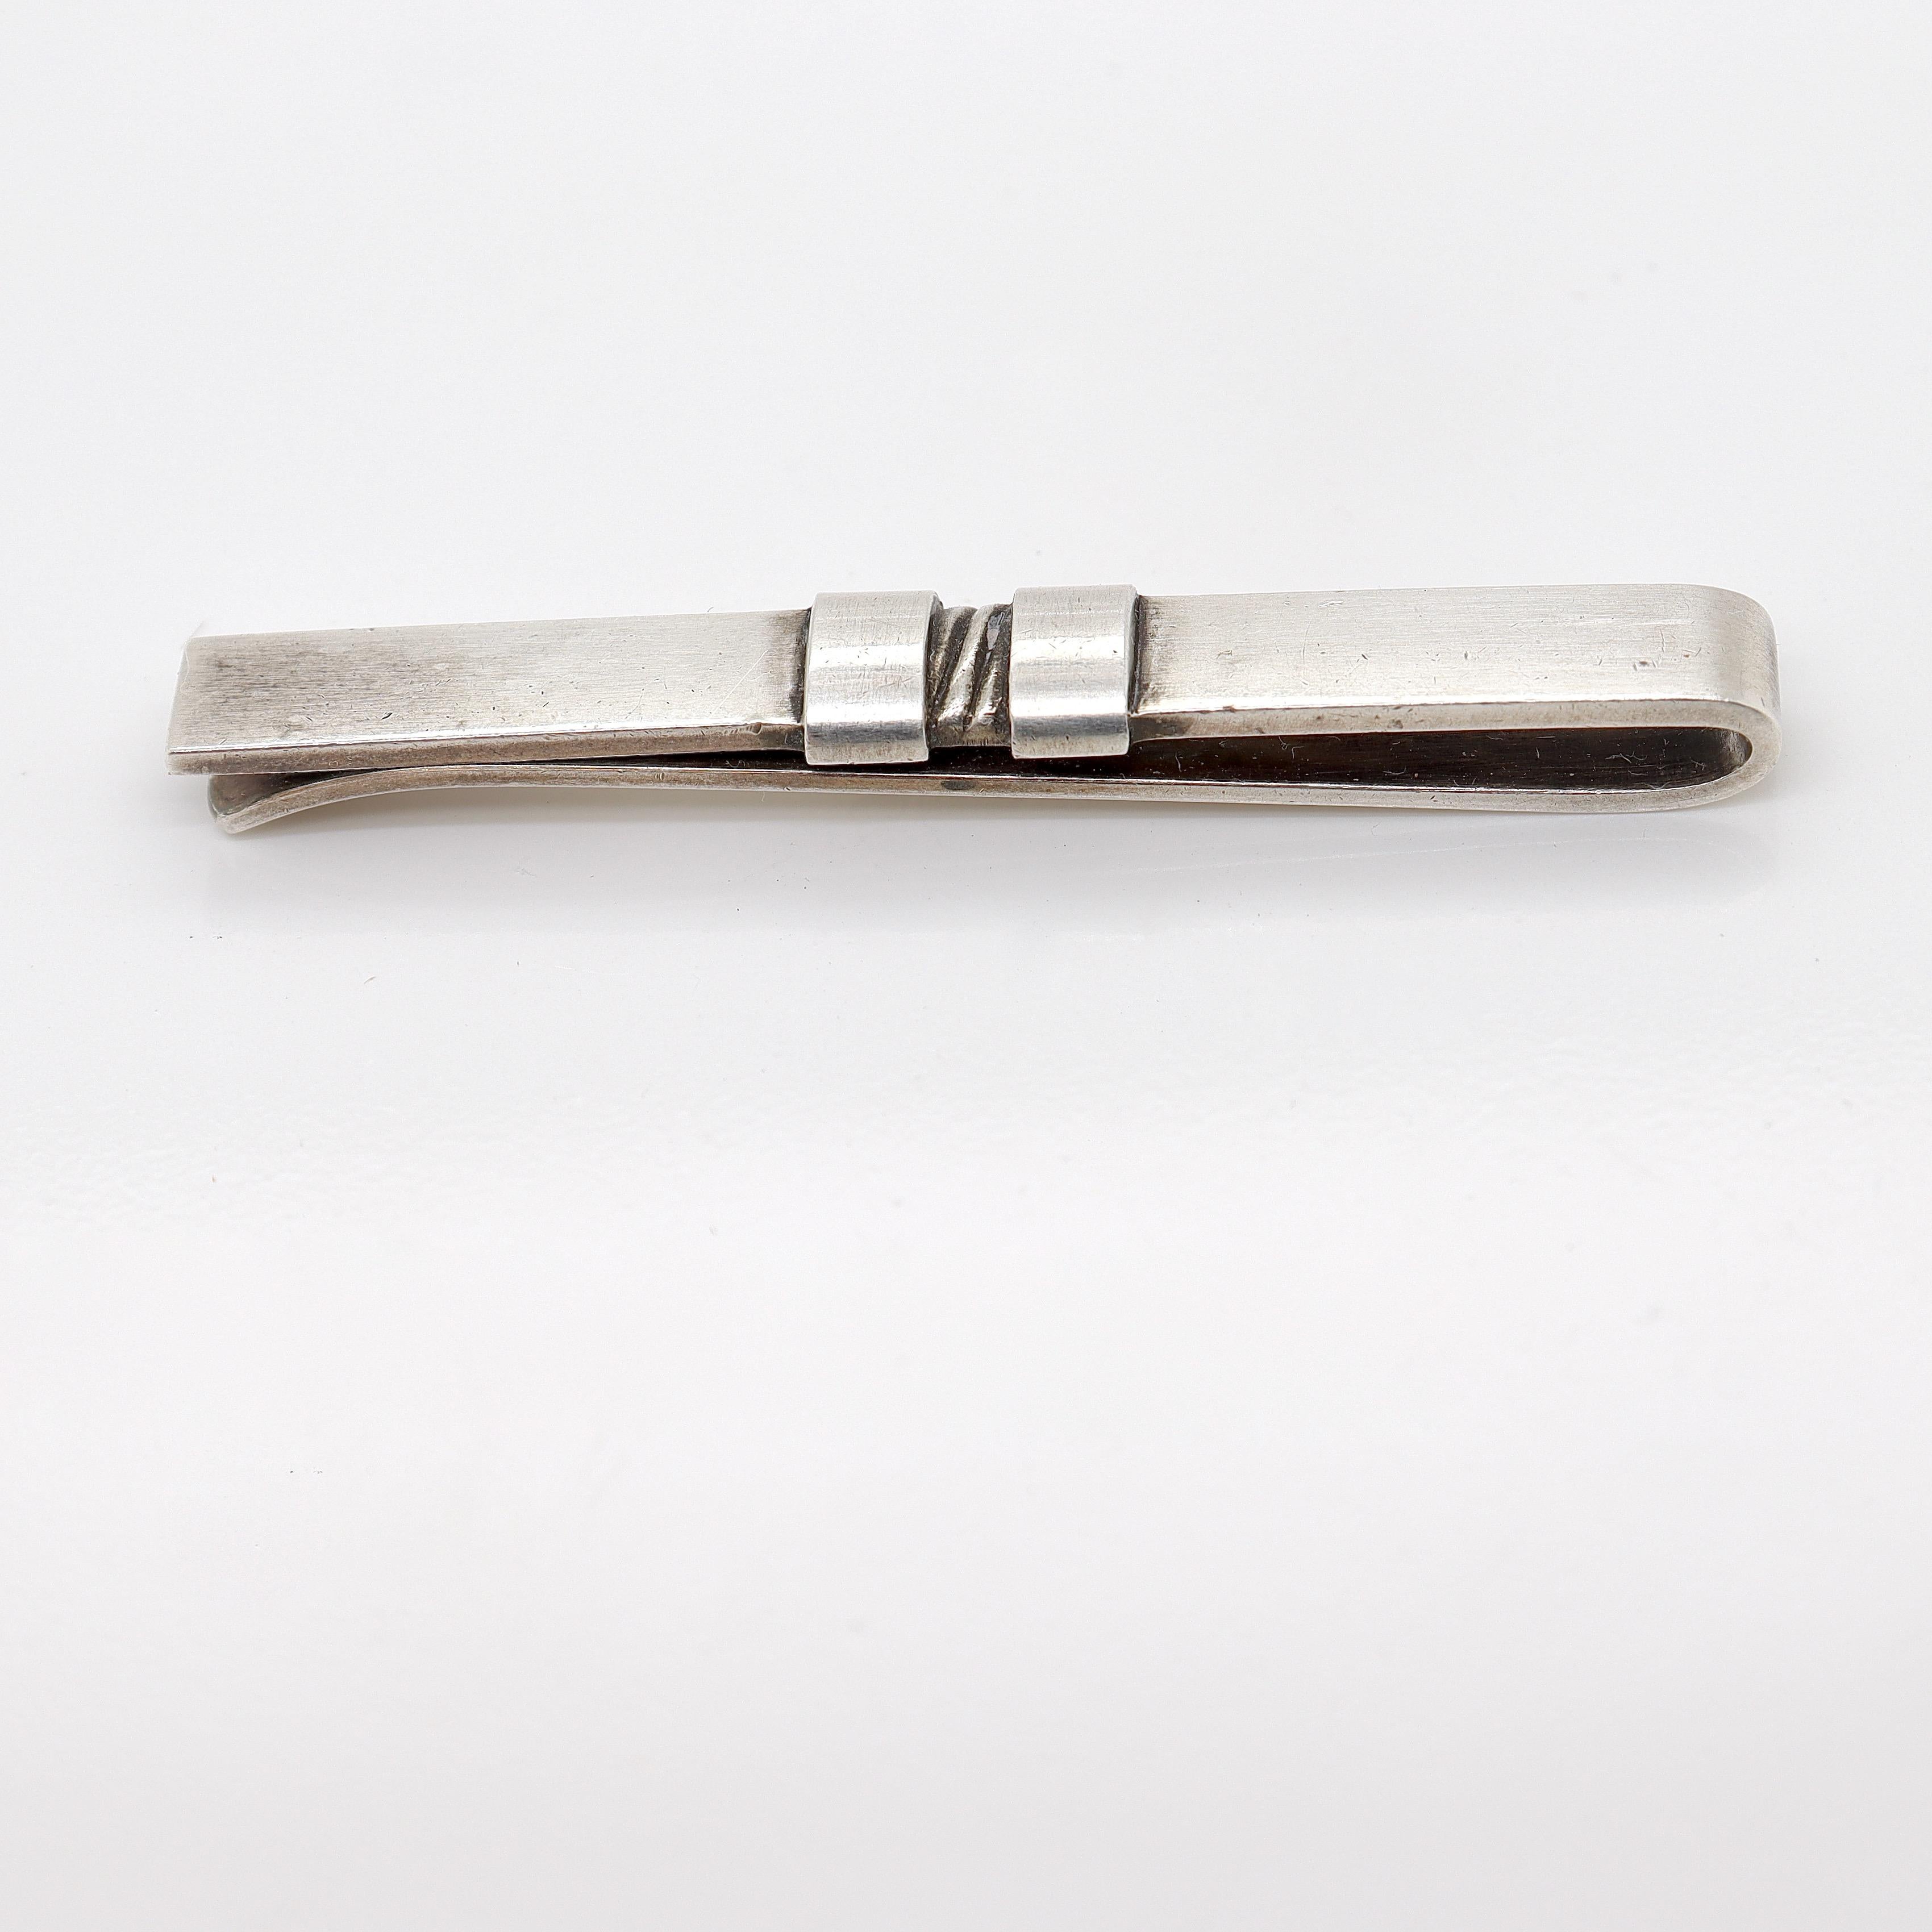 A fine Georg Jensen sterling silver tie clip. 

Model no. 74.

Designed by Sigvard Bernadotte for Georg Jensen circa 1953.

And of course, it can double as a money clip.

Simply a wonderful piece from one of Denmark's premier